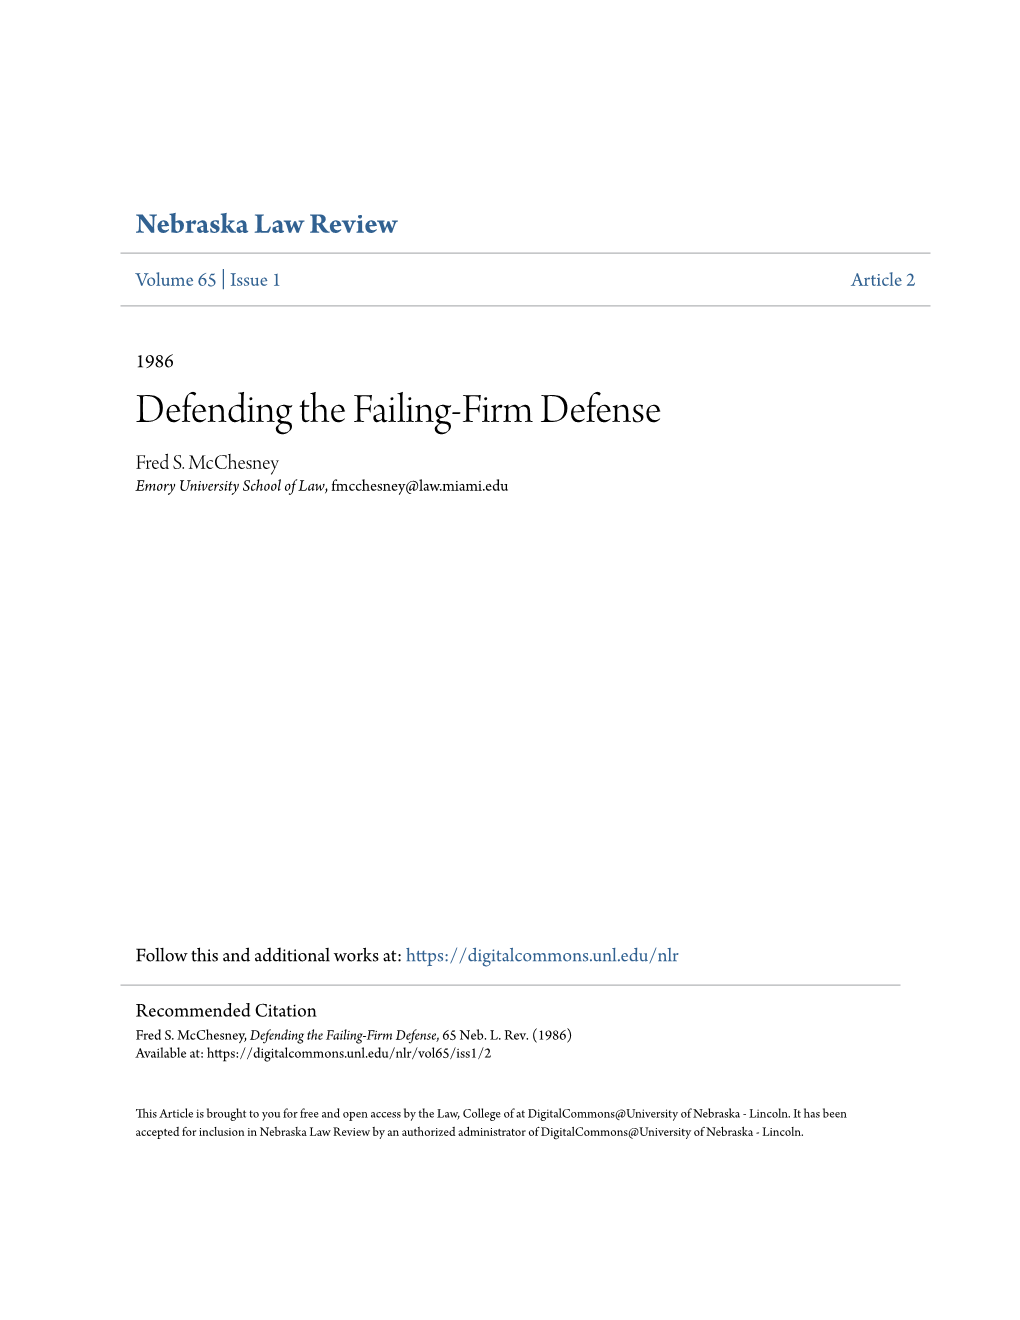 Defending the Failing-Firm Defense Fred S